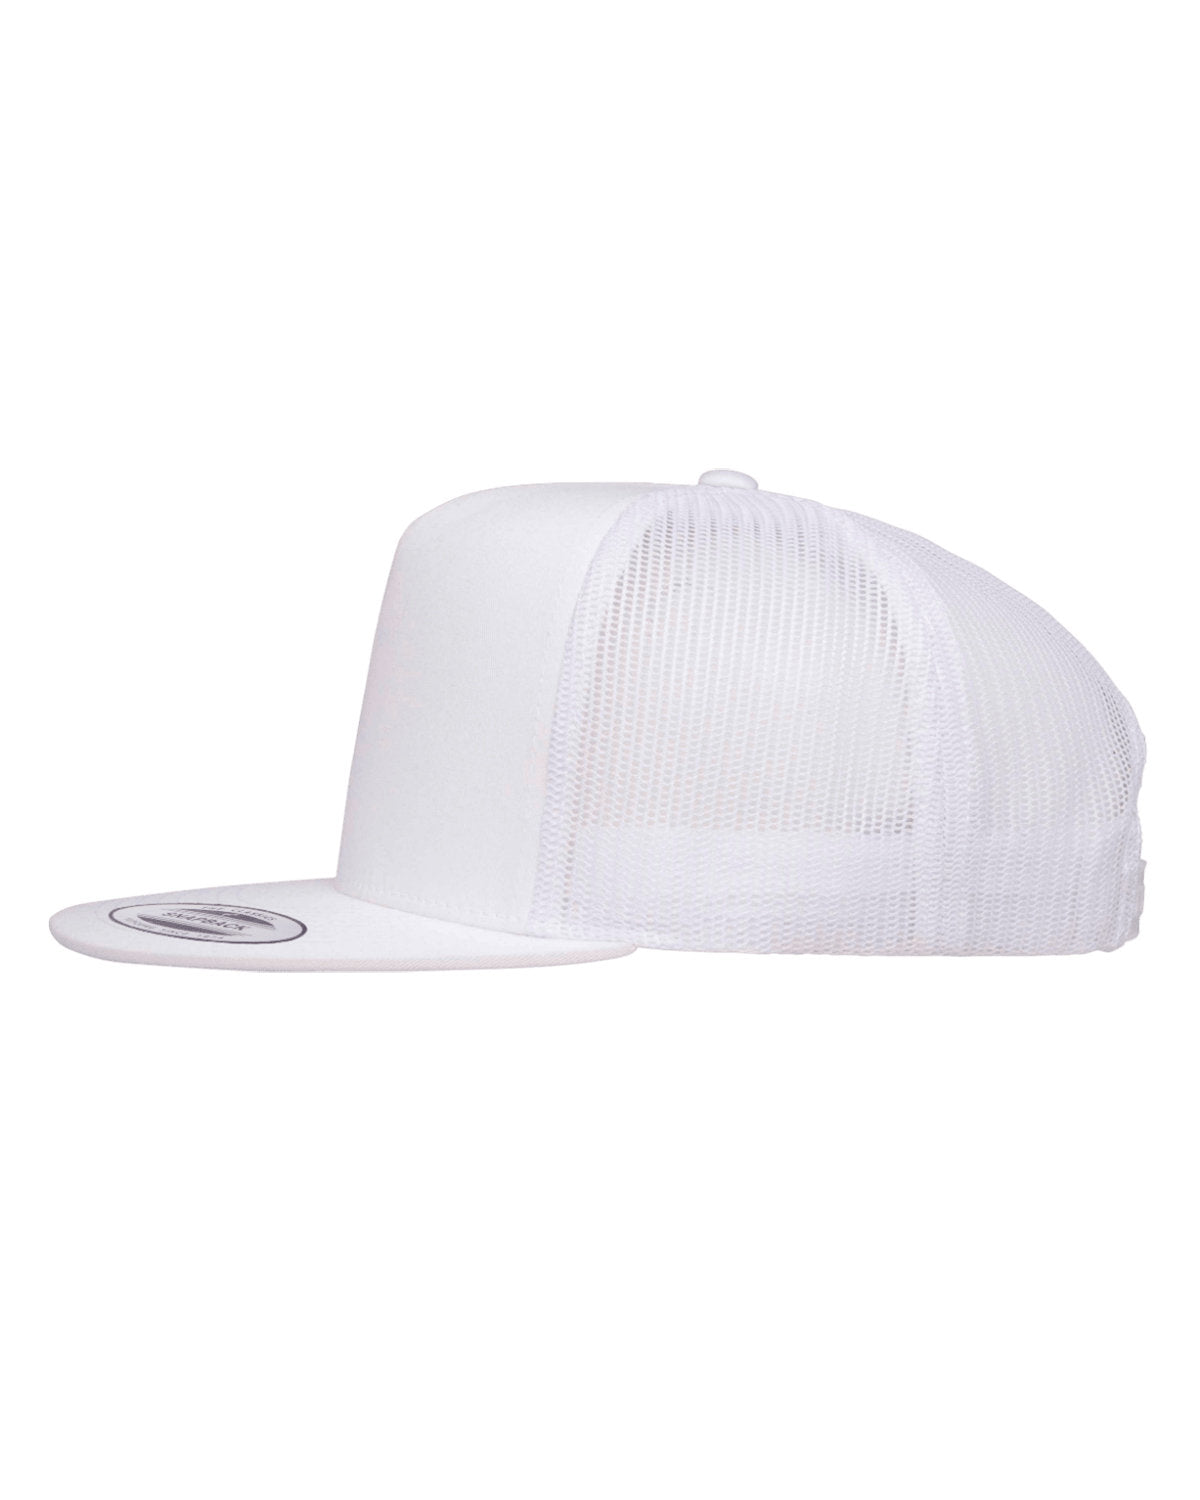 Yupoong 5 -Panel Classic Branded Trucker Caps, White